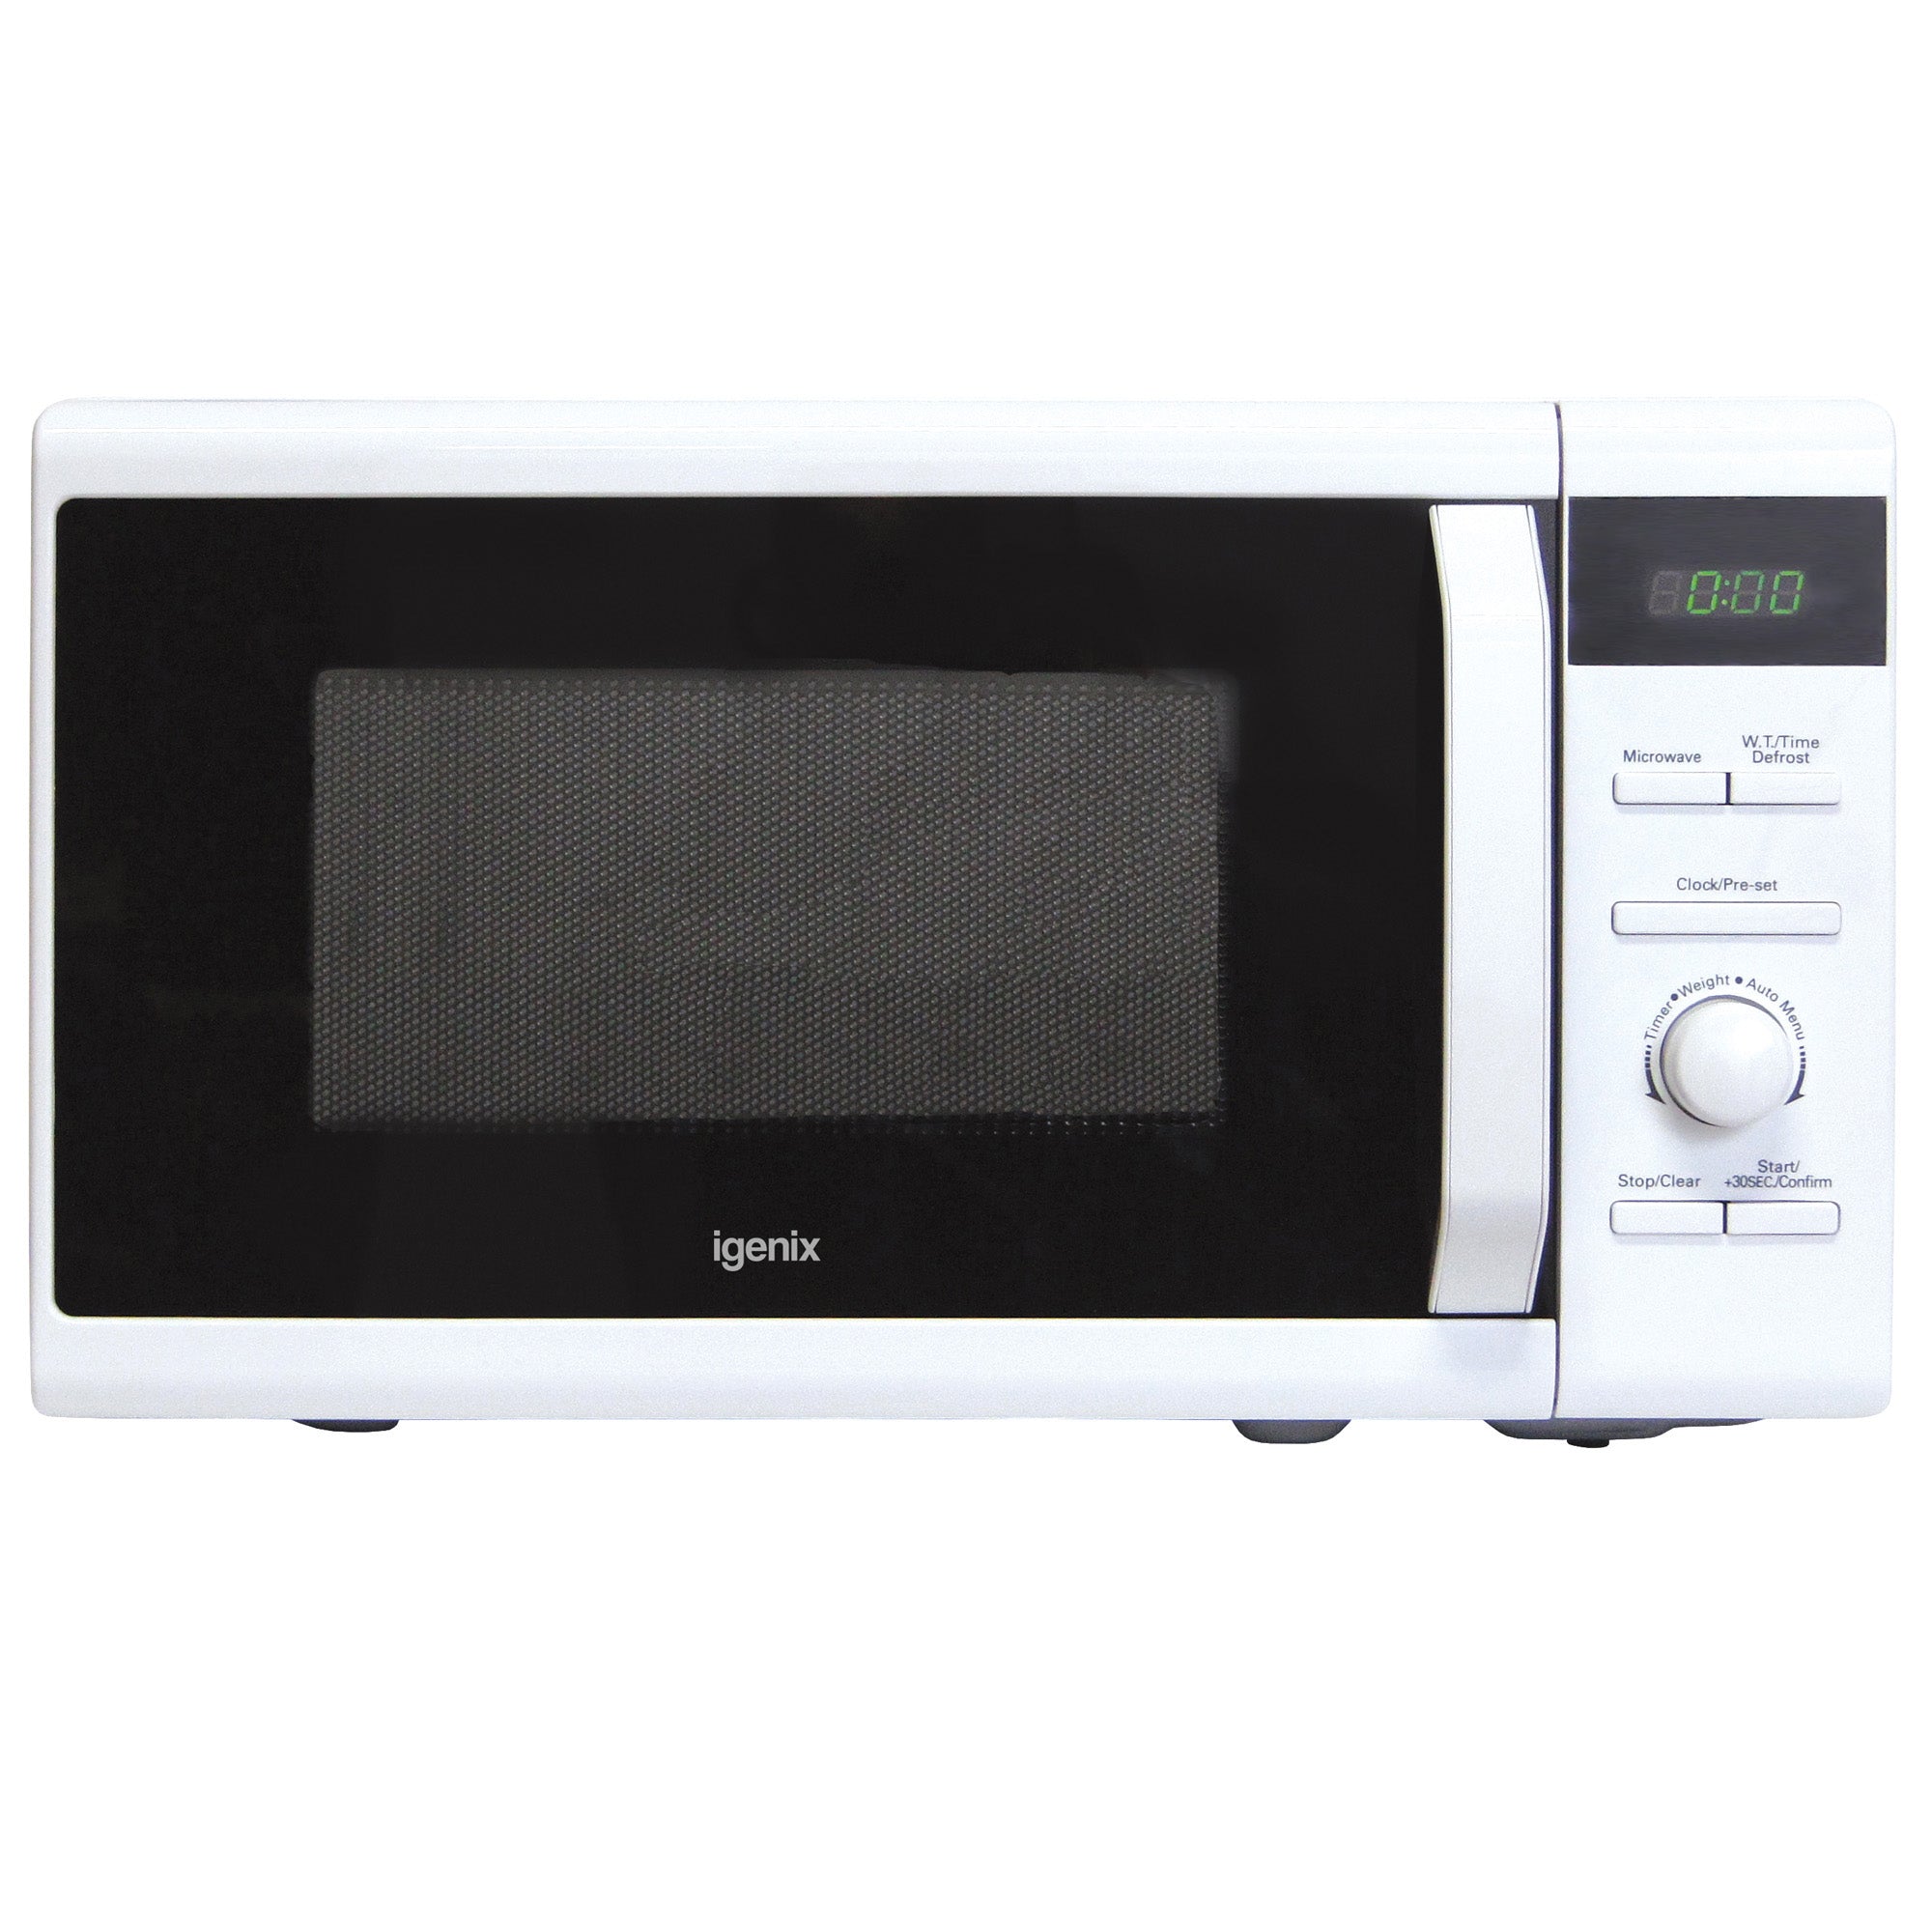 Digital Microwave, 20 Litre, 8 Cooking Settings, 800W, White